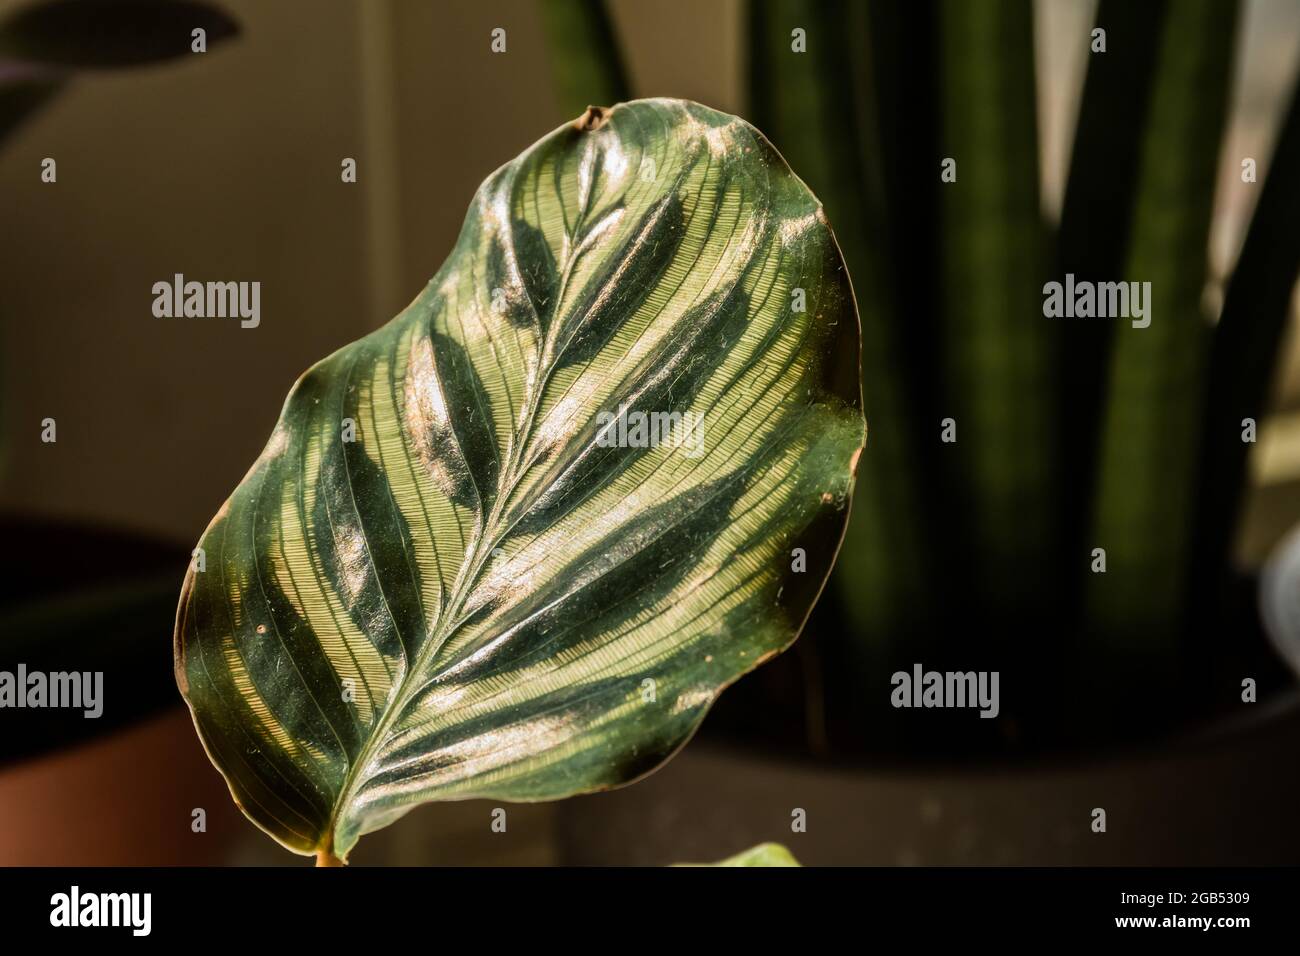 A close up of the large leaf of a Calathea Makoyana (Peacock Plant) which is also known as Cathedral Windows due to the semi-transparent leaf. Stock Photo